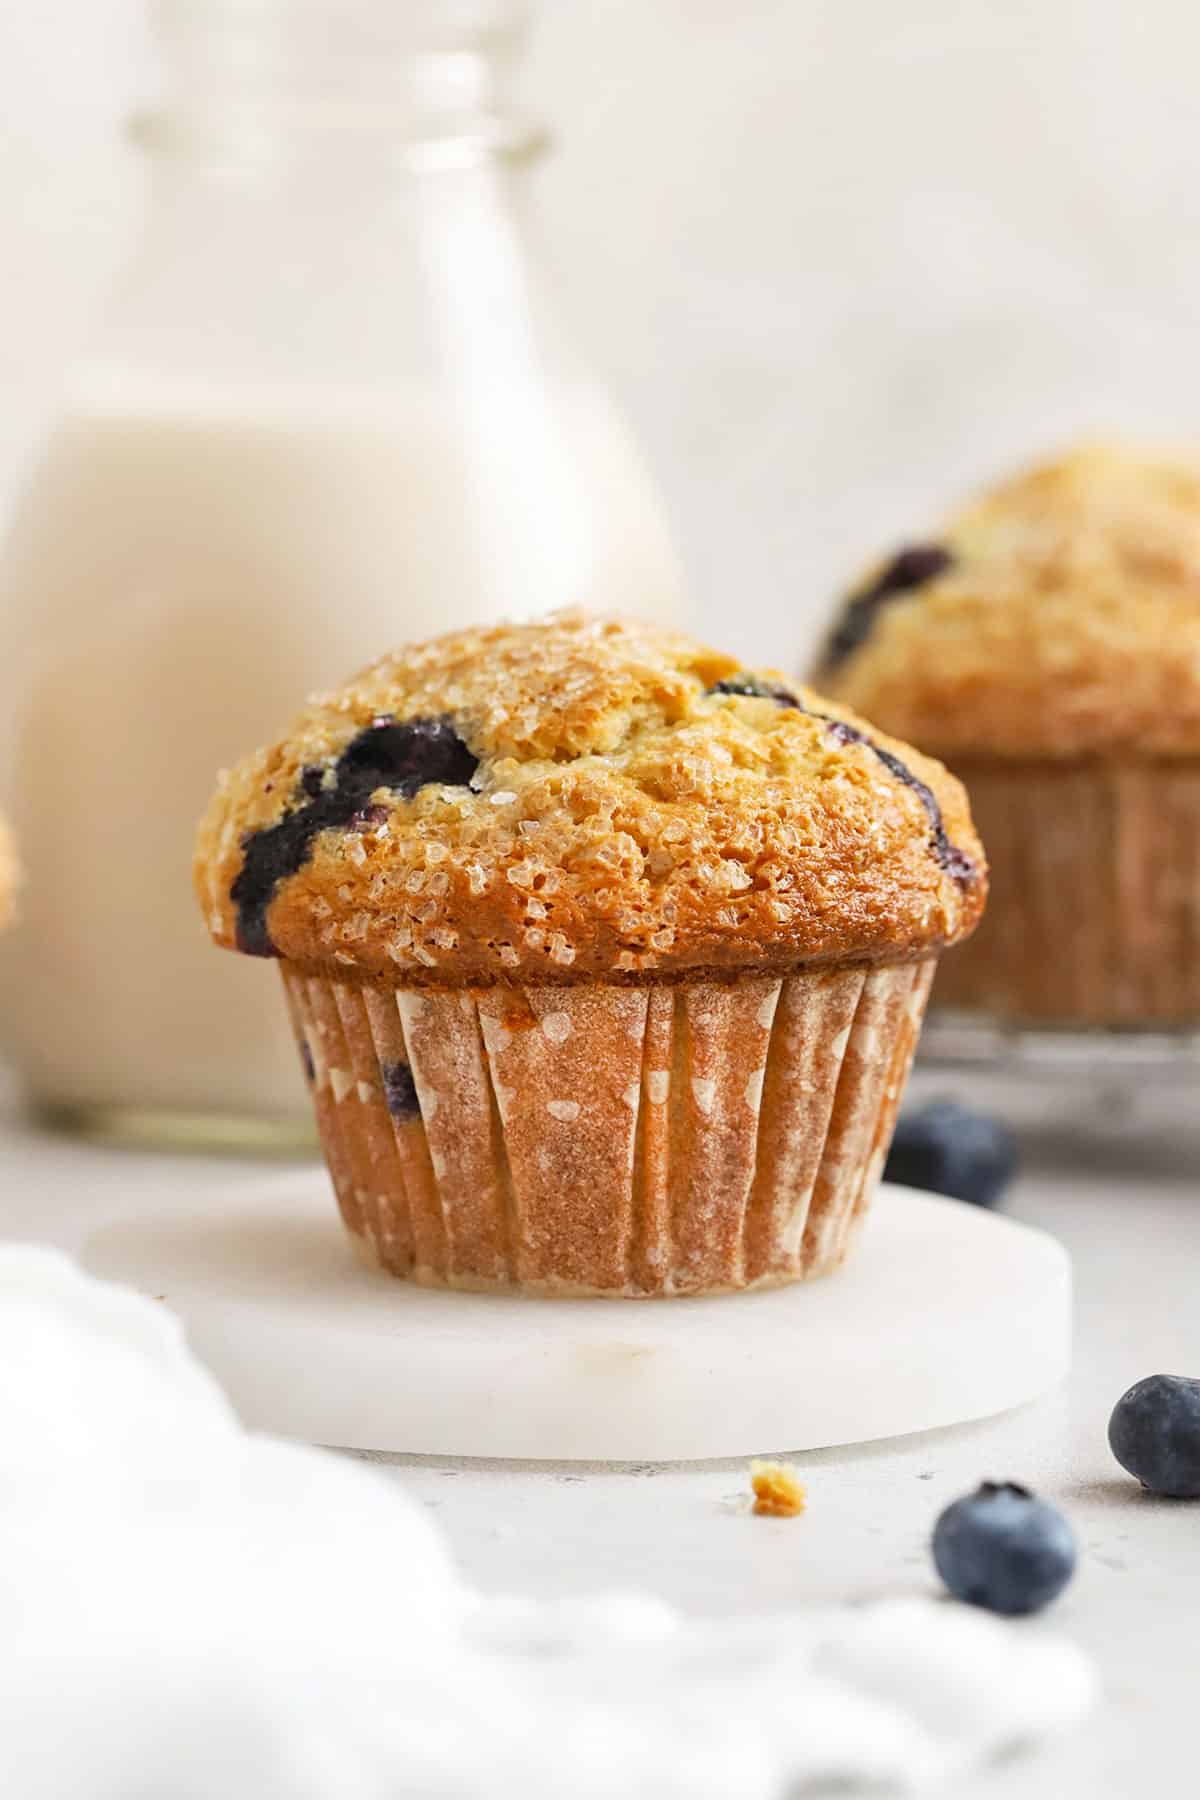 bakery-style gluten-free blueberry muffins with fresh blueberries